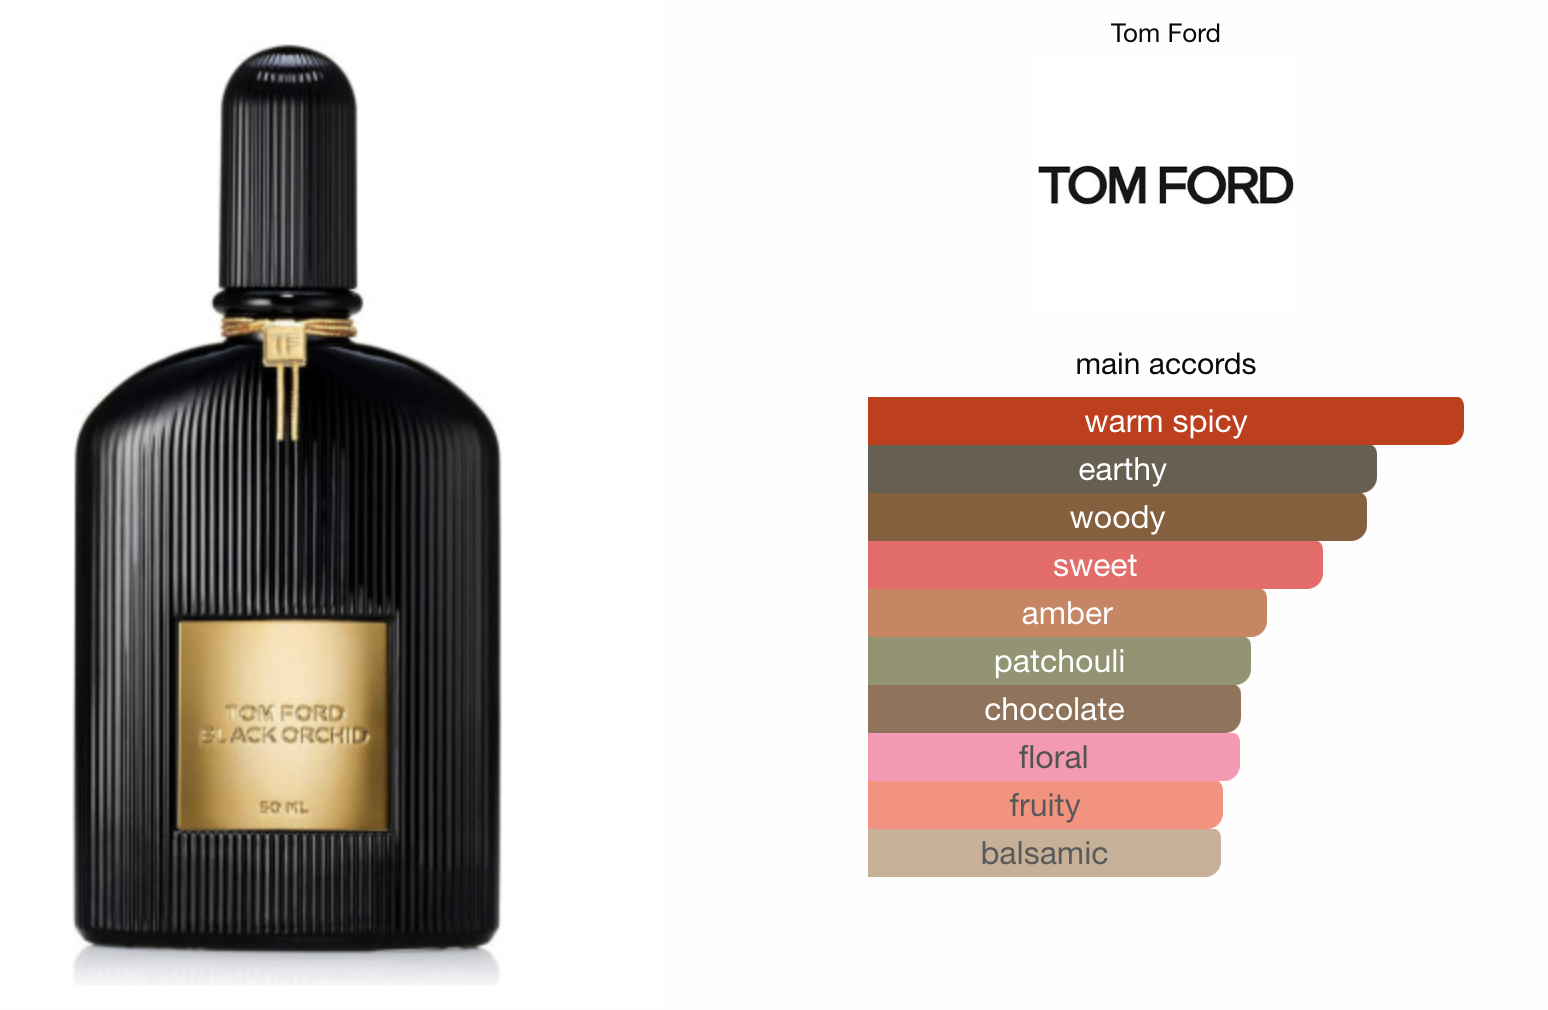 What Tom Ford perfume is the best?